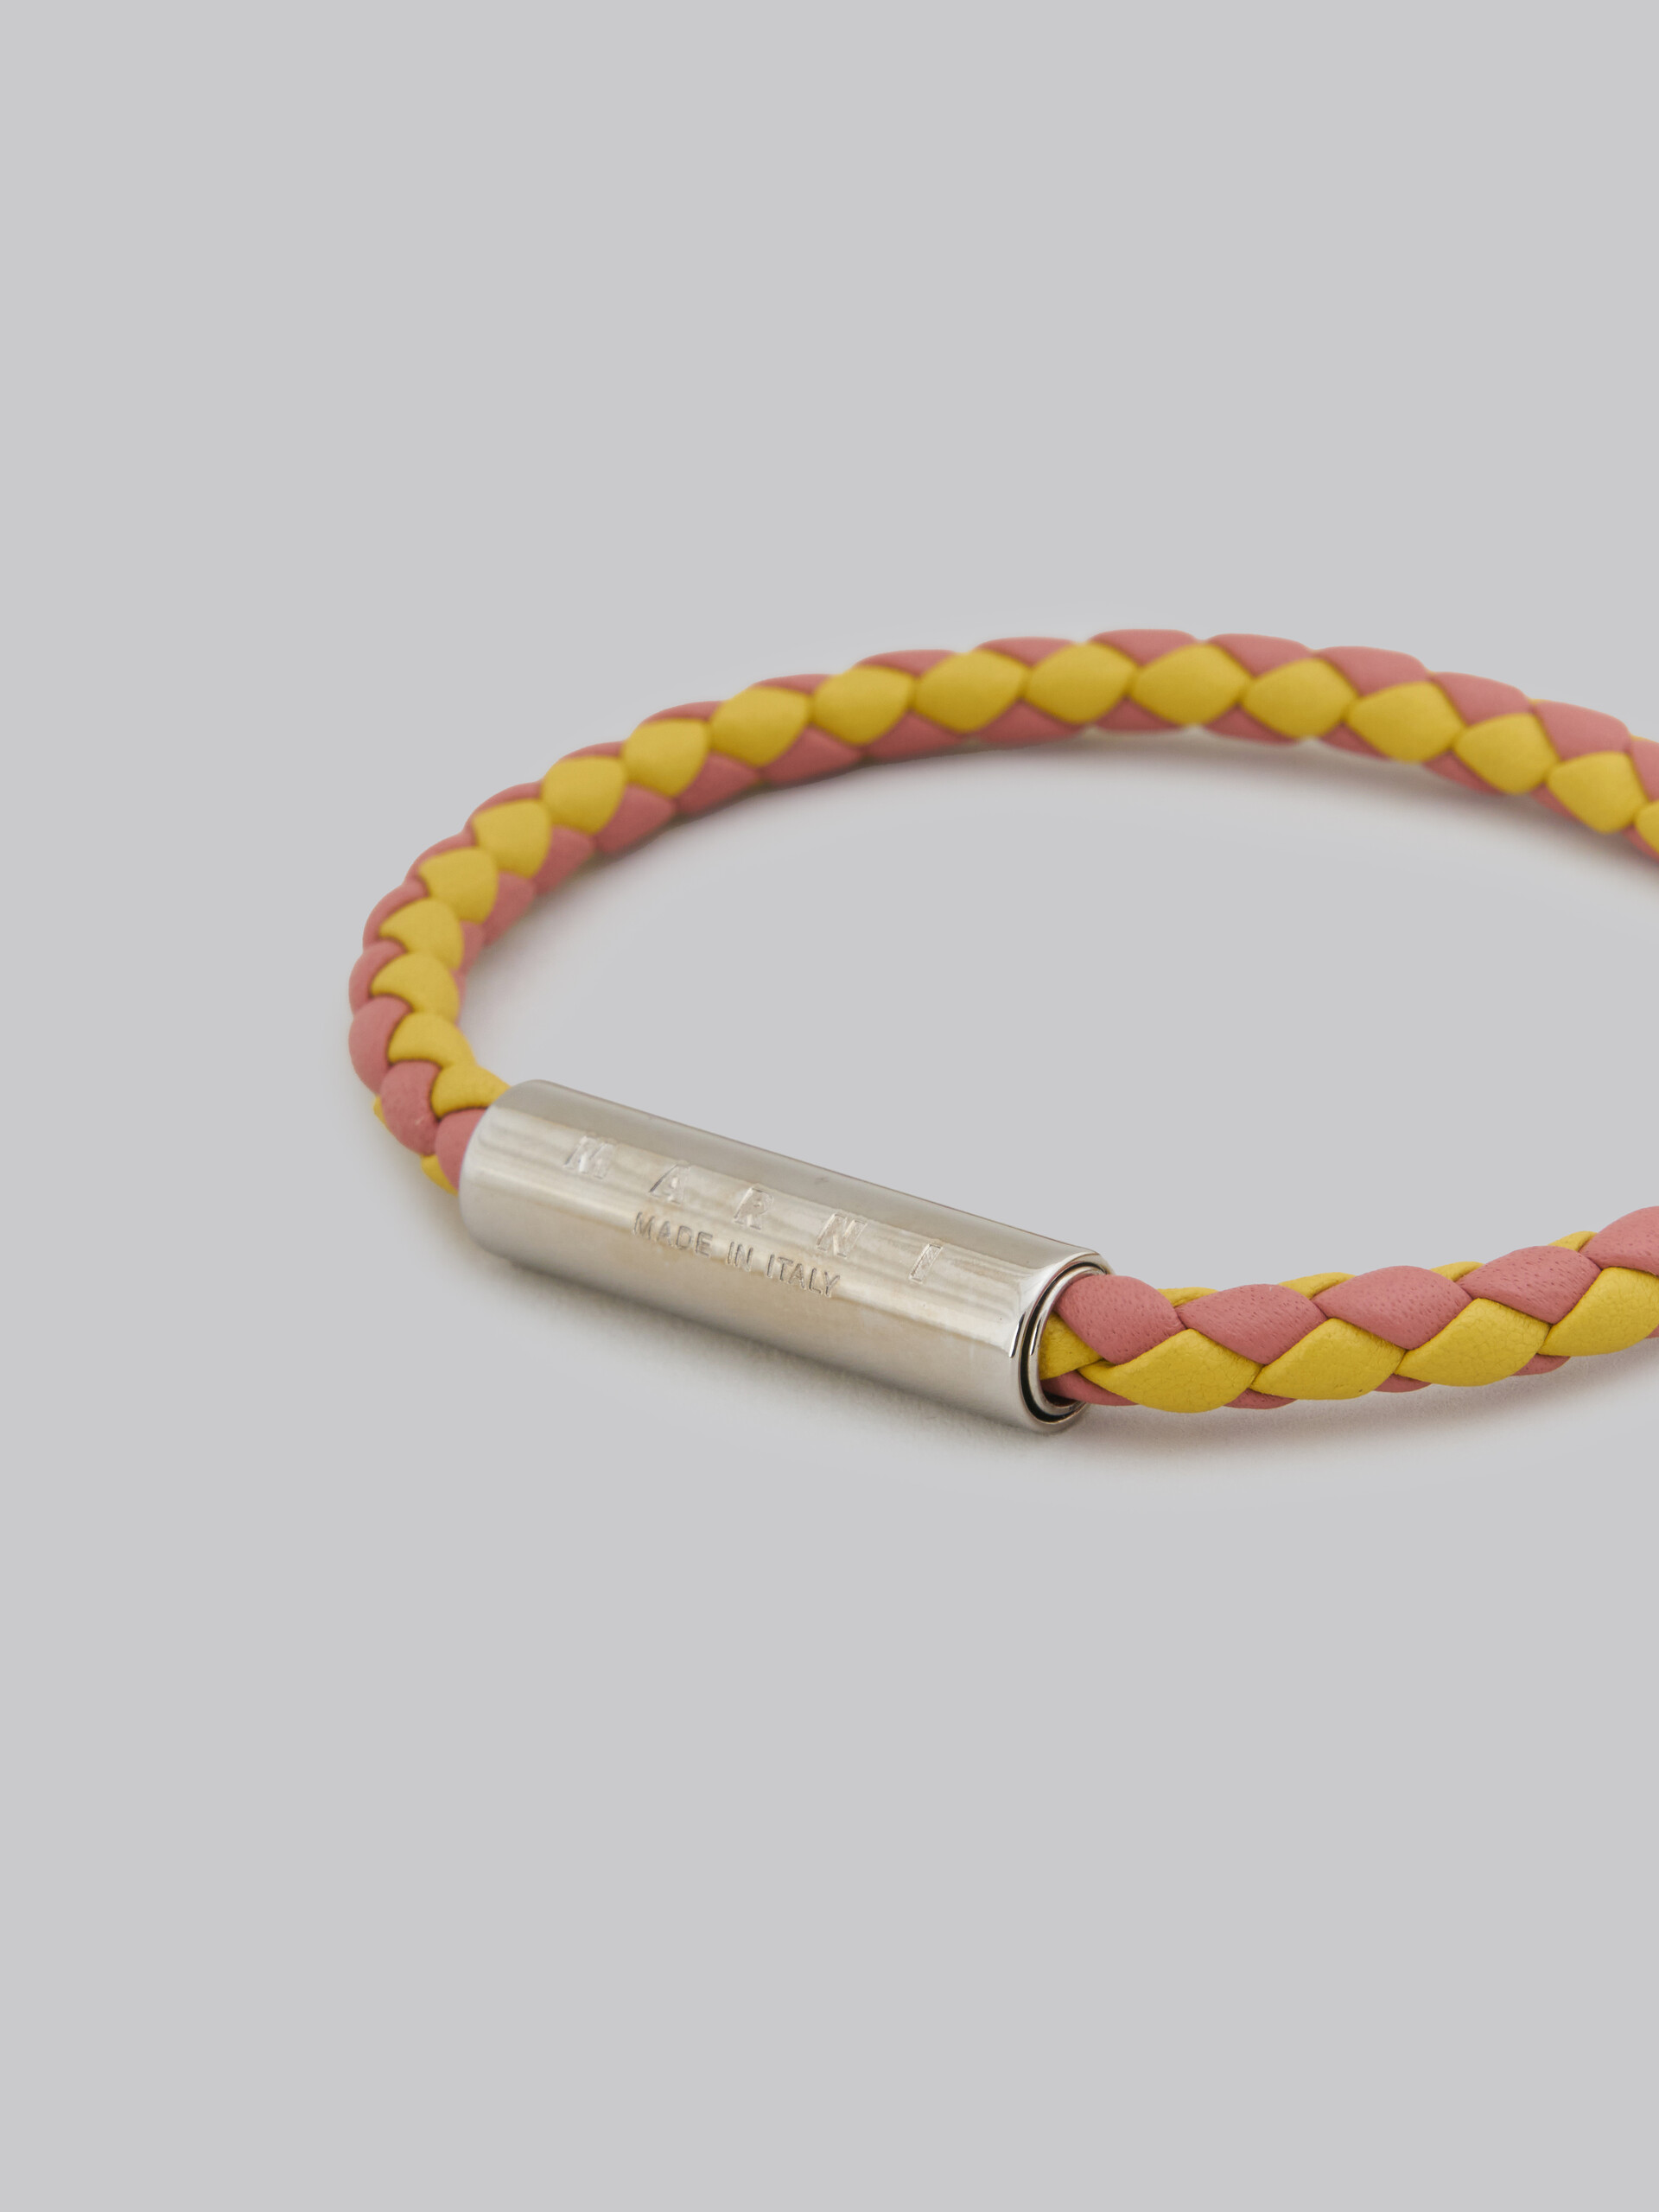 Yellow and pink woven leather bracelet - Bracelets - Image 4